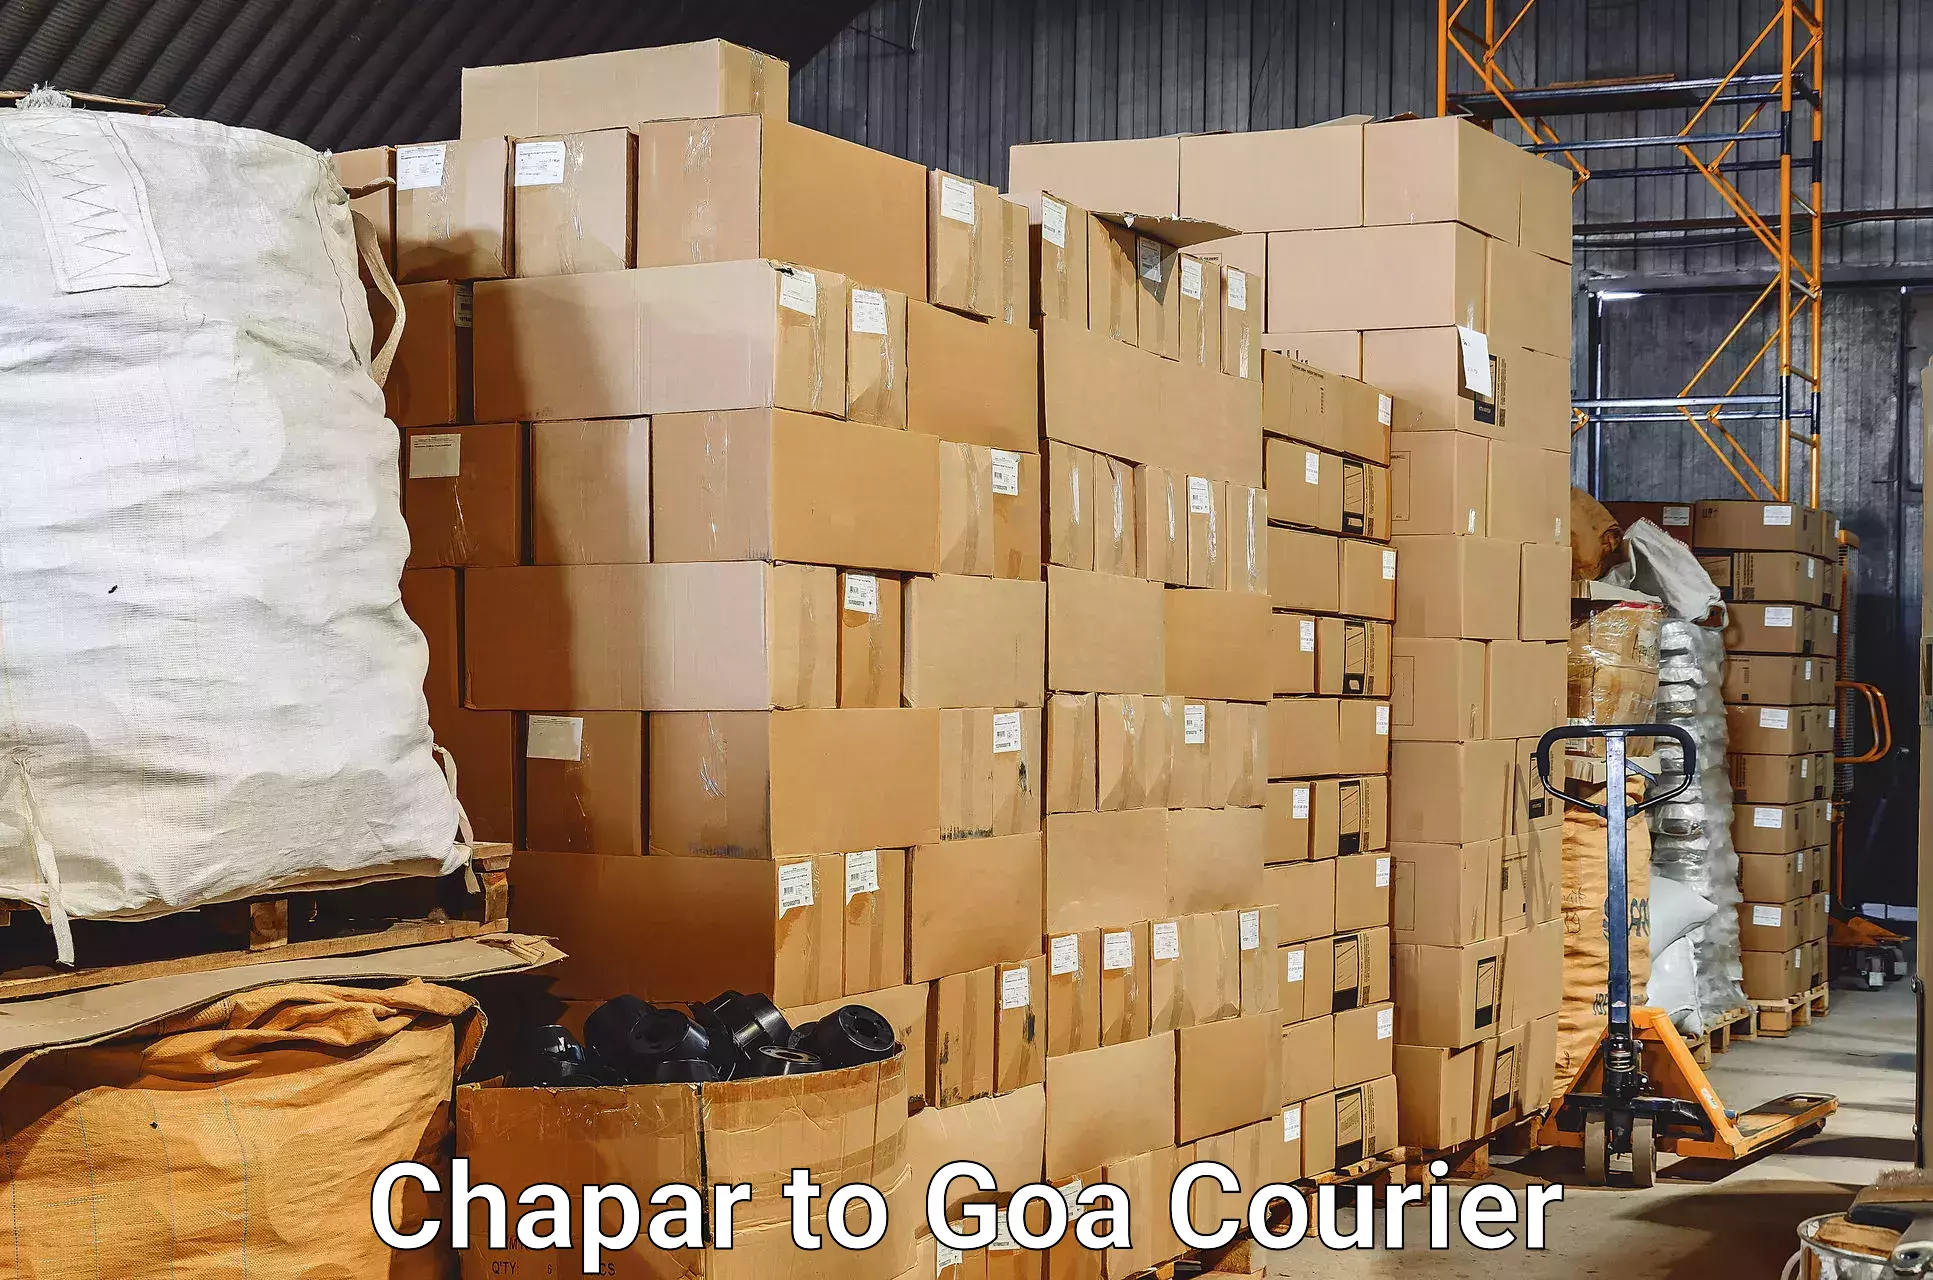 Express luggage delivery in Chapar to Goa